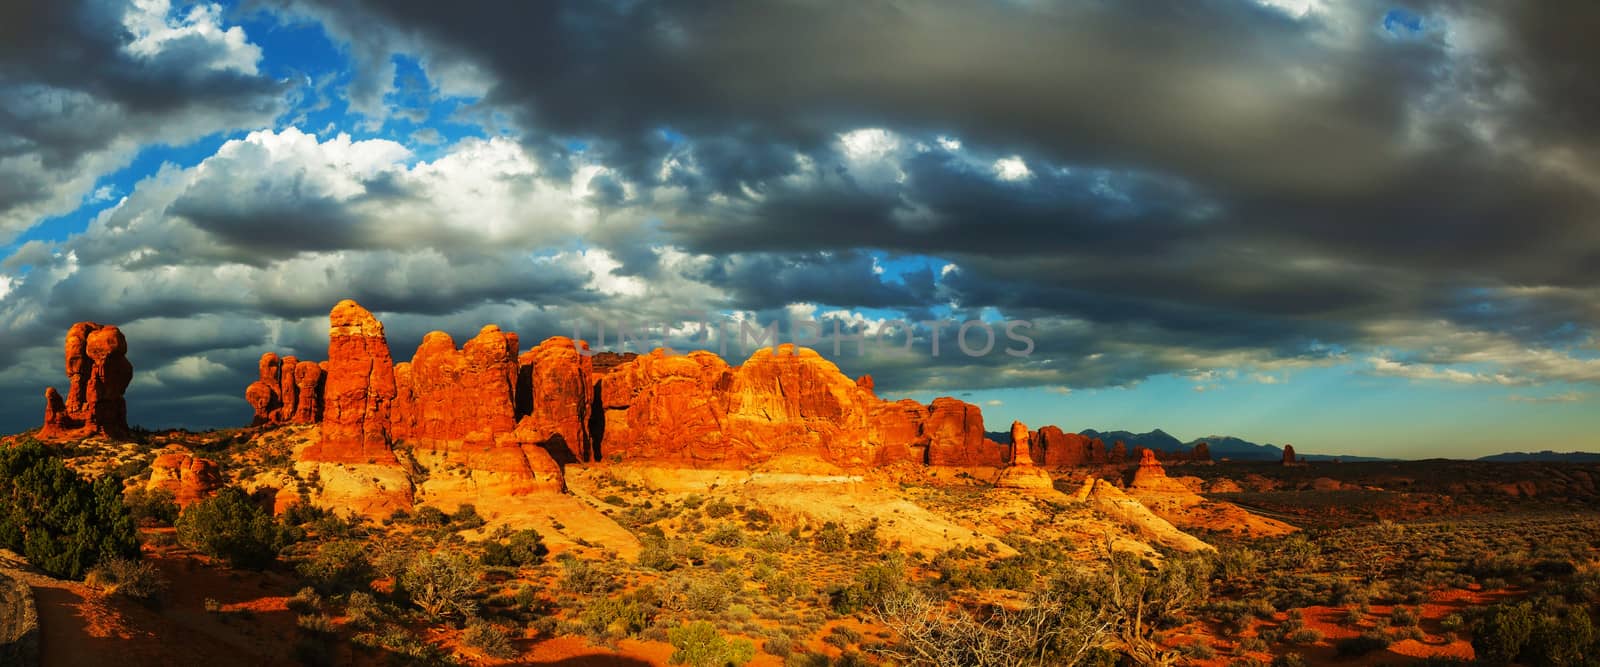 Scenic view at the Arches National Park, Utah, USA by AndreyKr